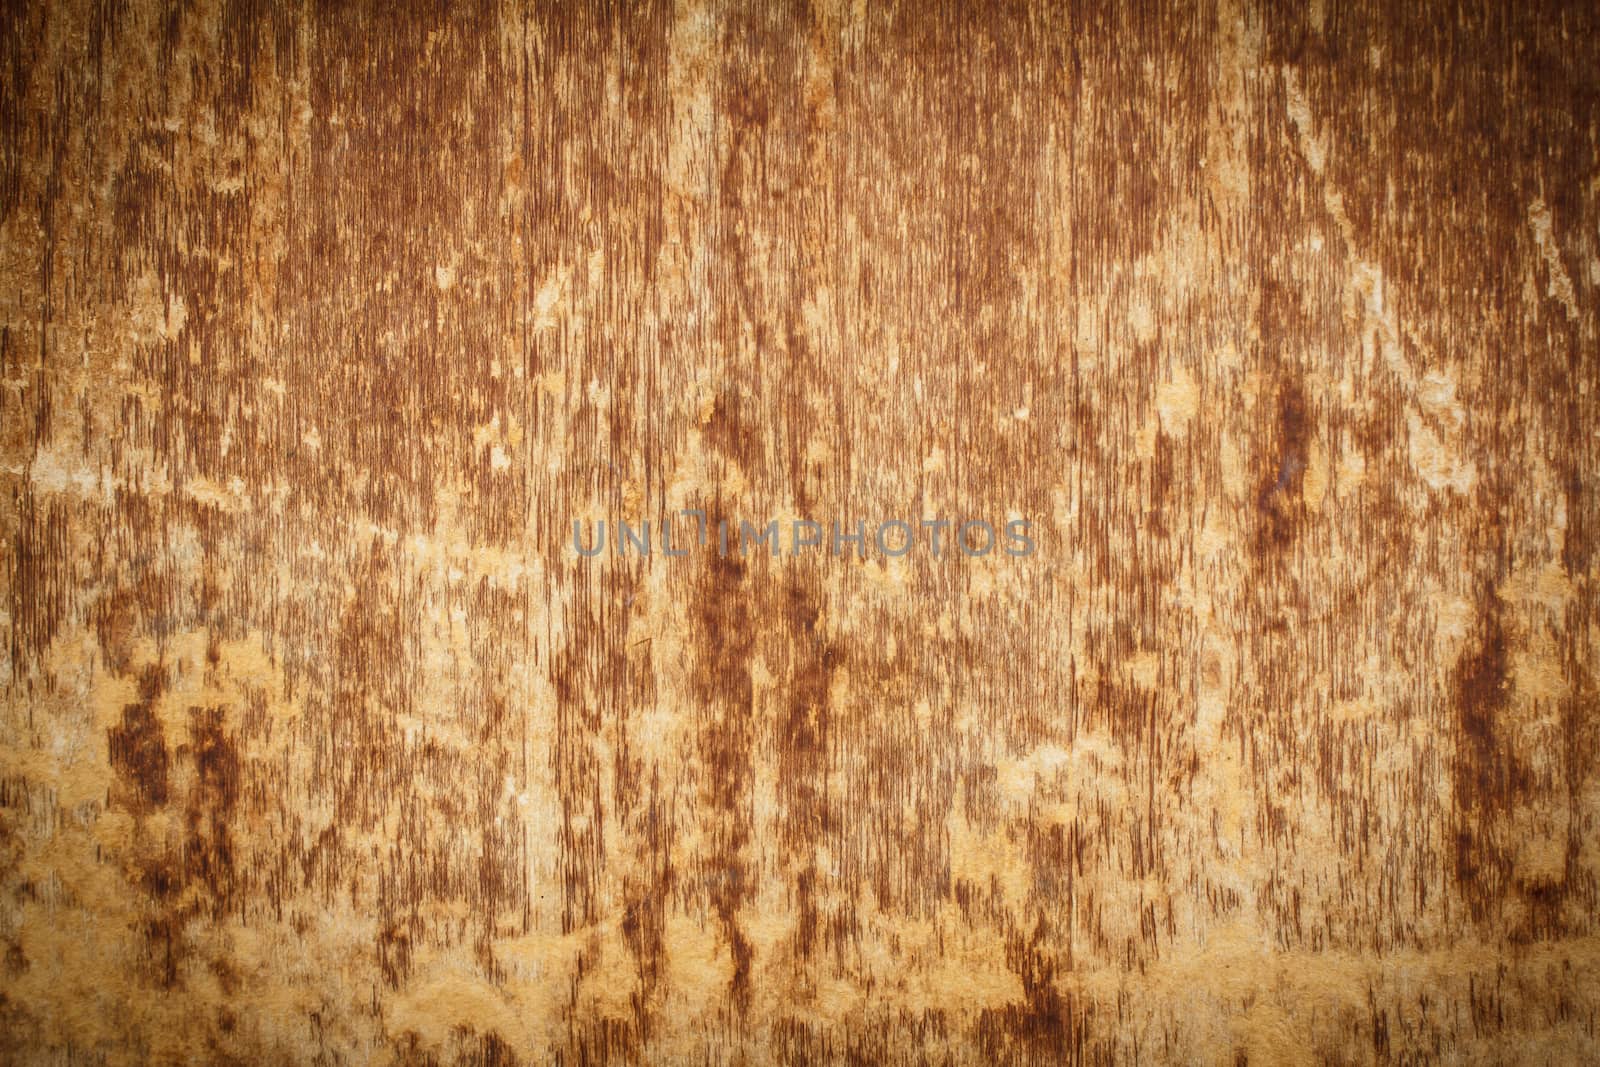 wood grungy background with space for text